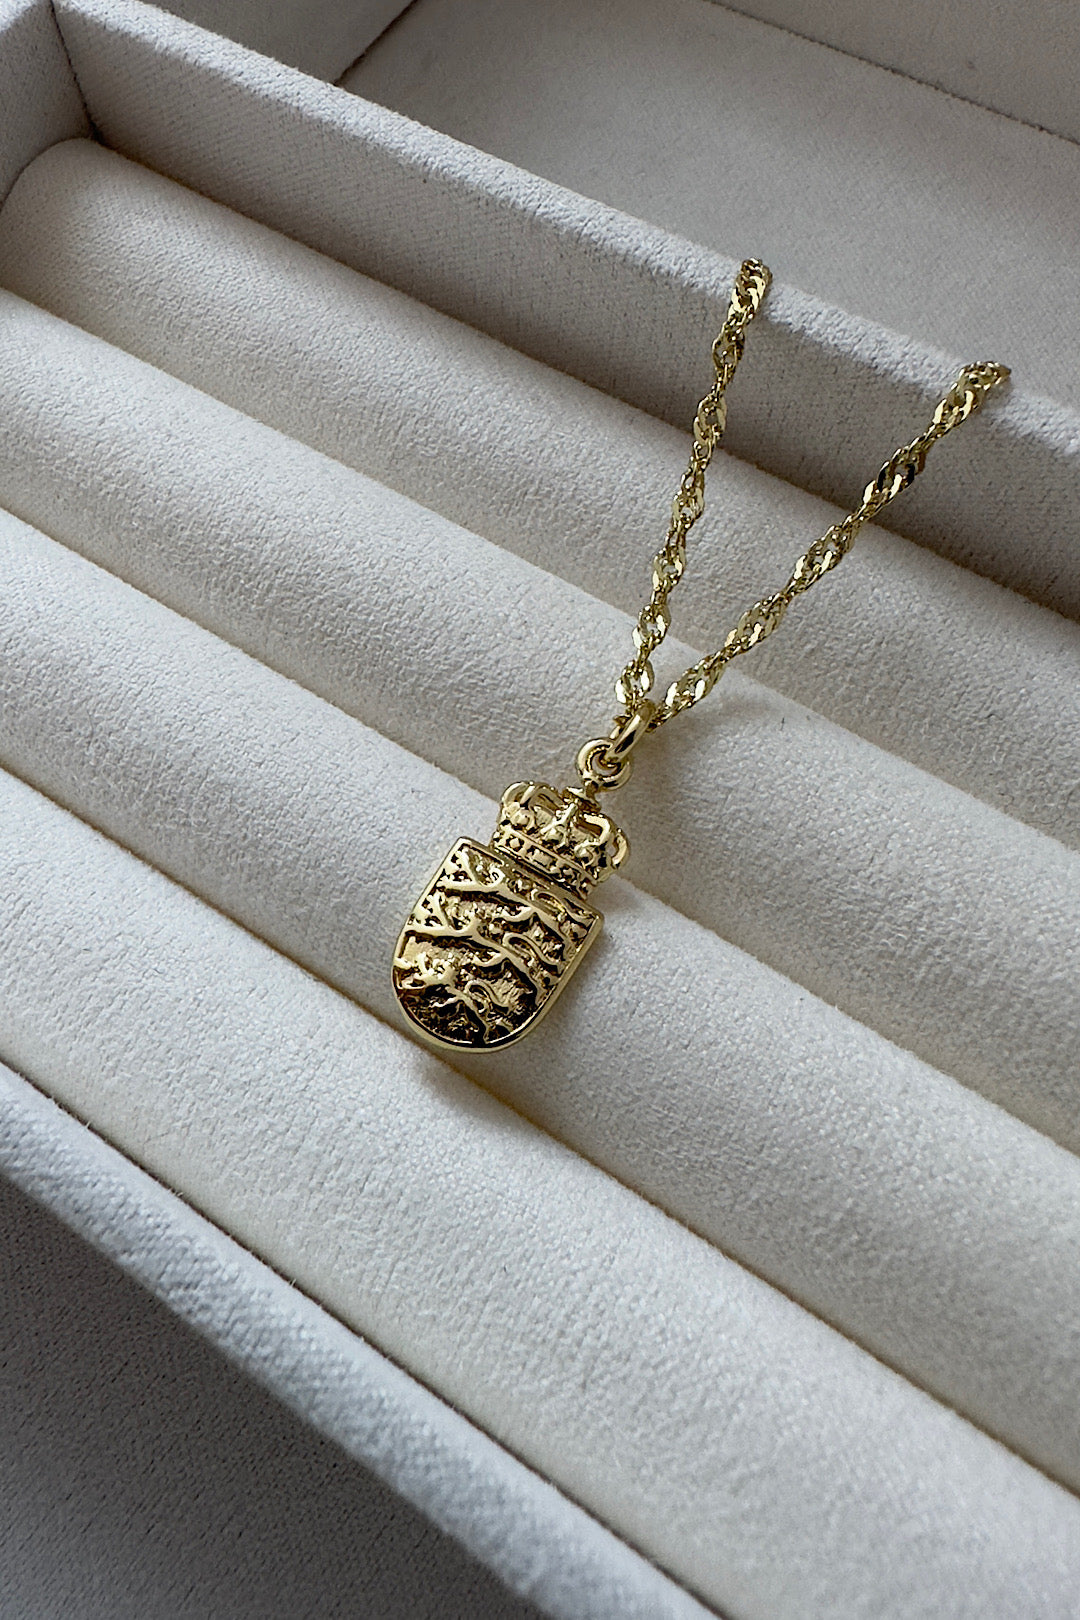 Denmark Coat of Arms Gold Swirl Necklace 